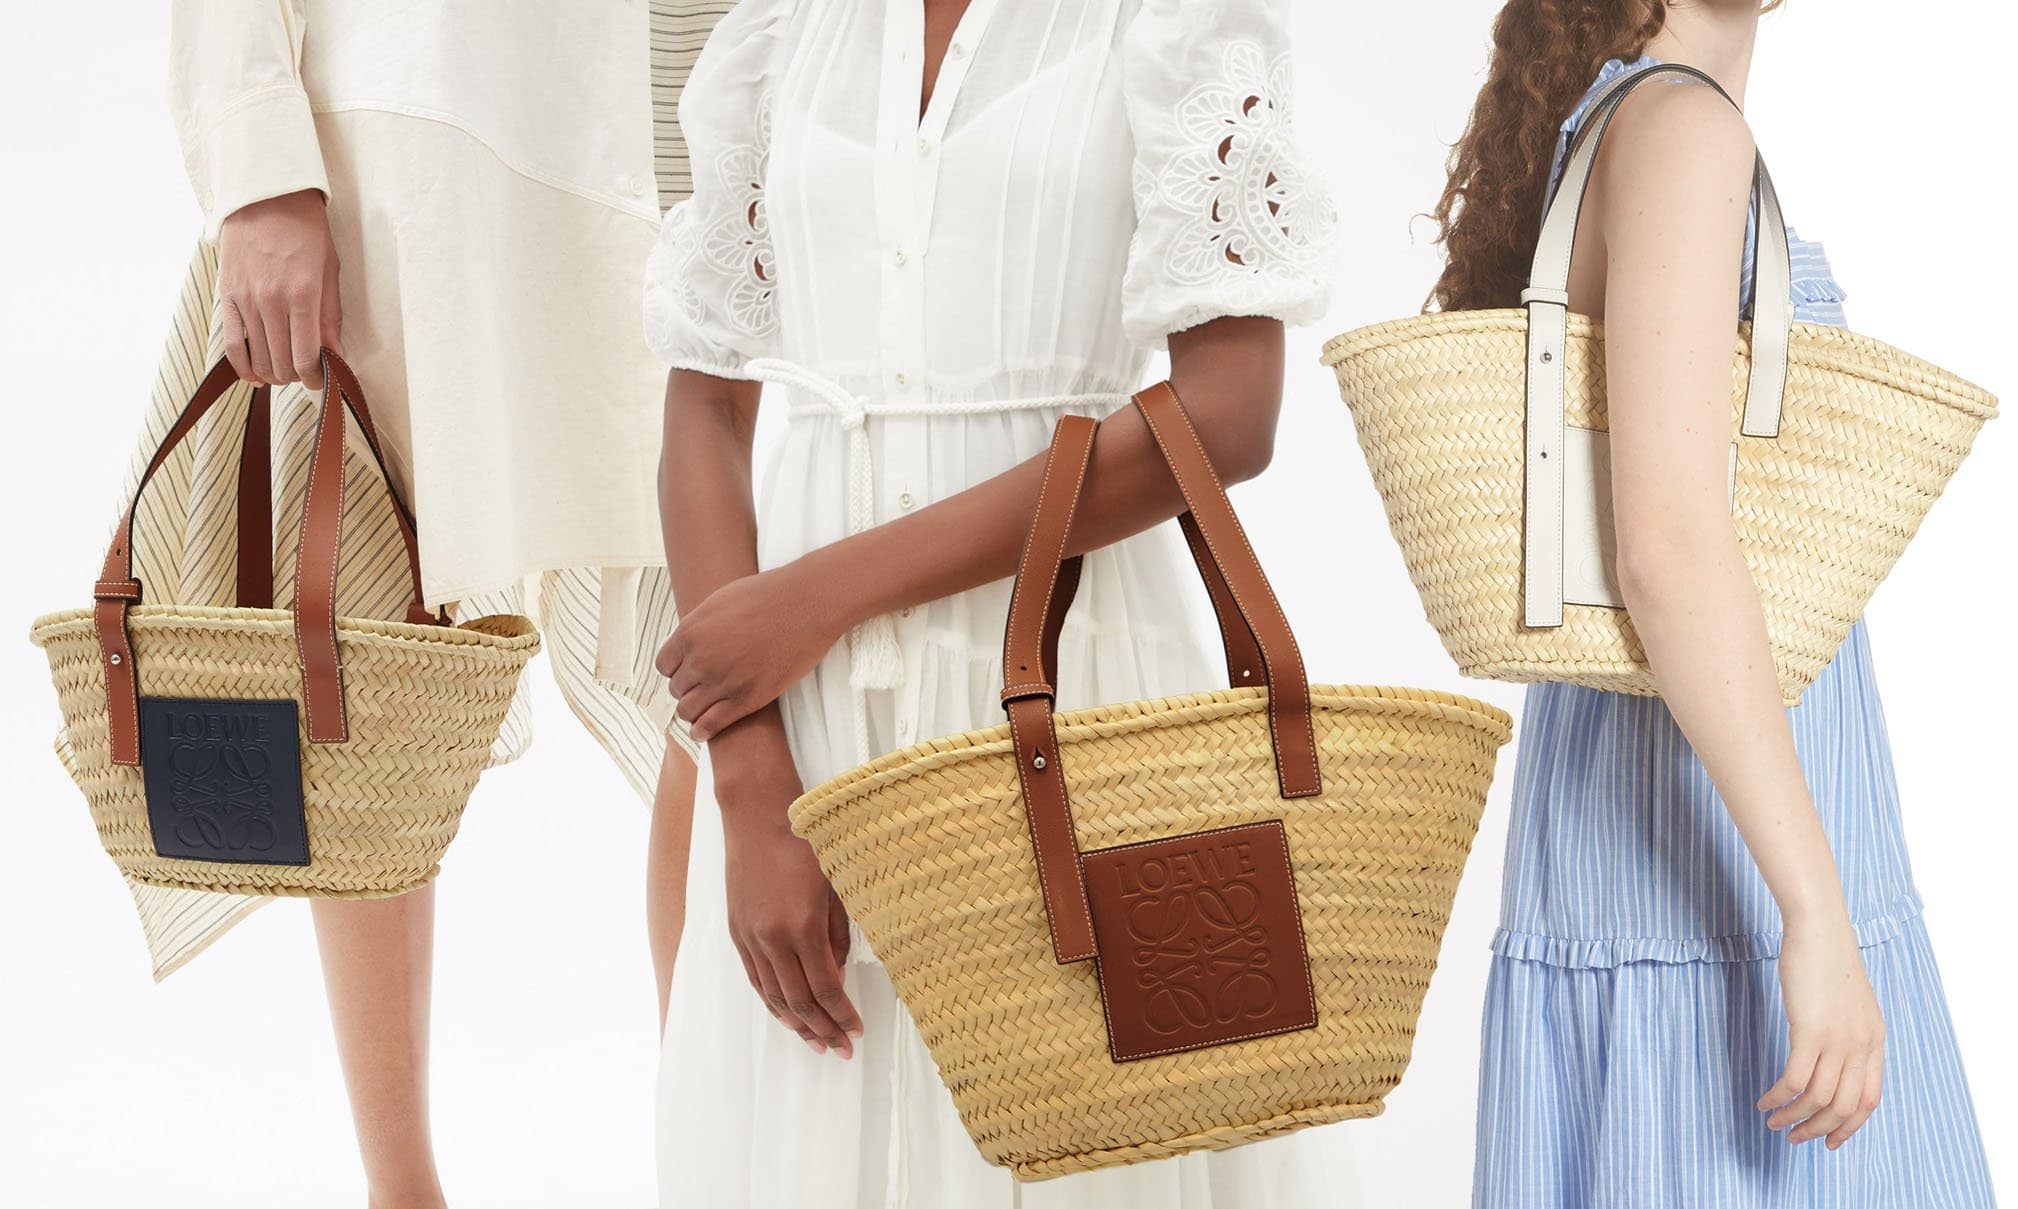 Available in different sizes, the Loewe basket bag features woven palm leaves with leather trims and an Anagram patch